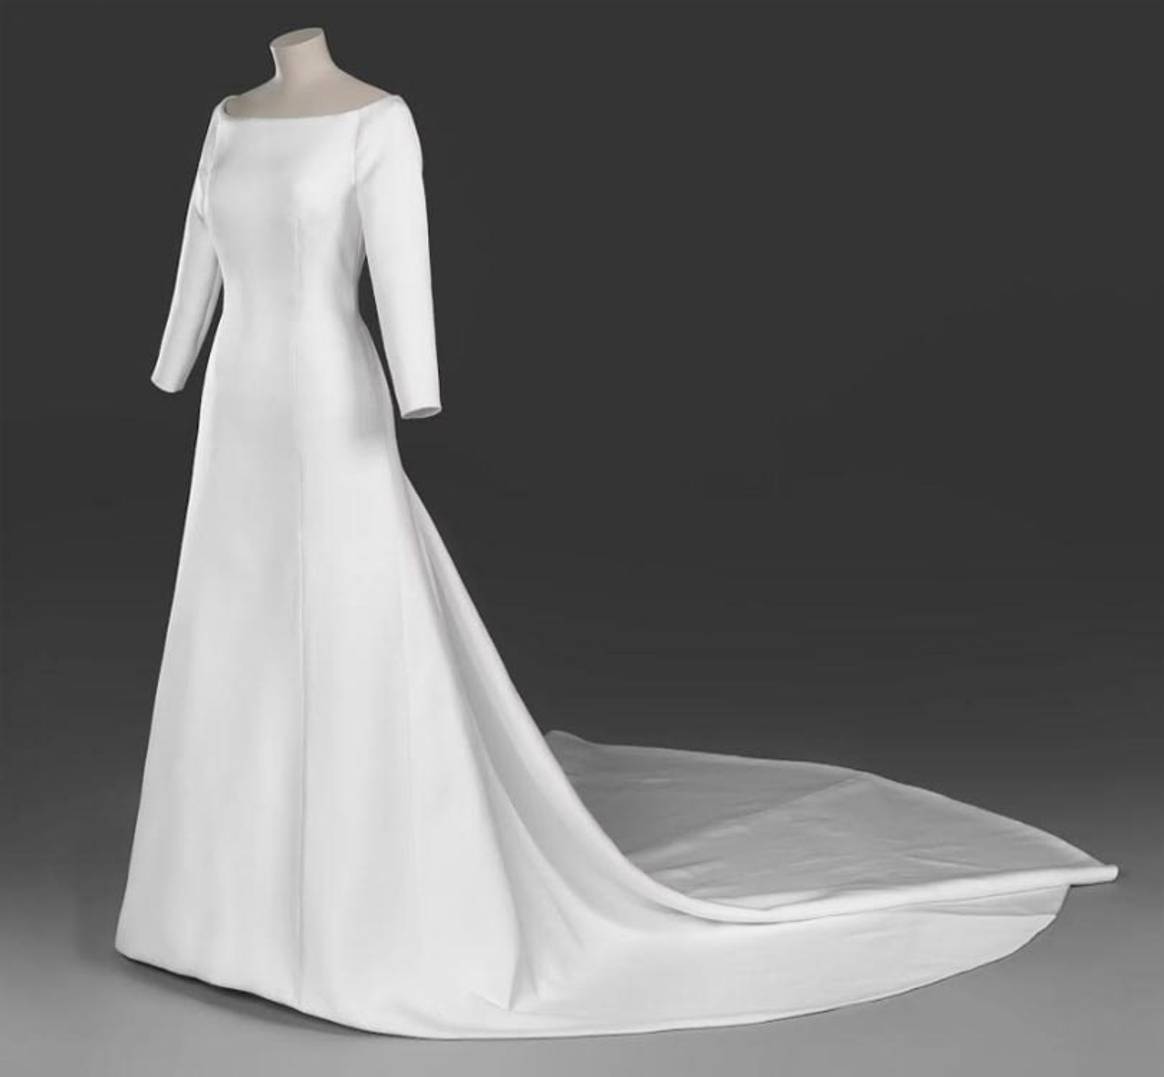 Meghan Markle’s wedding dress to go on display in exhibition